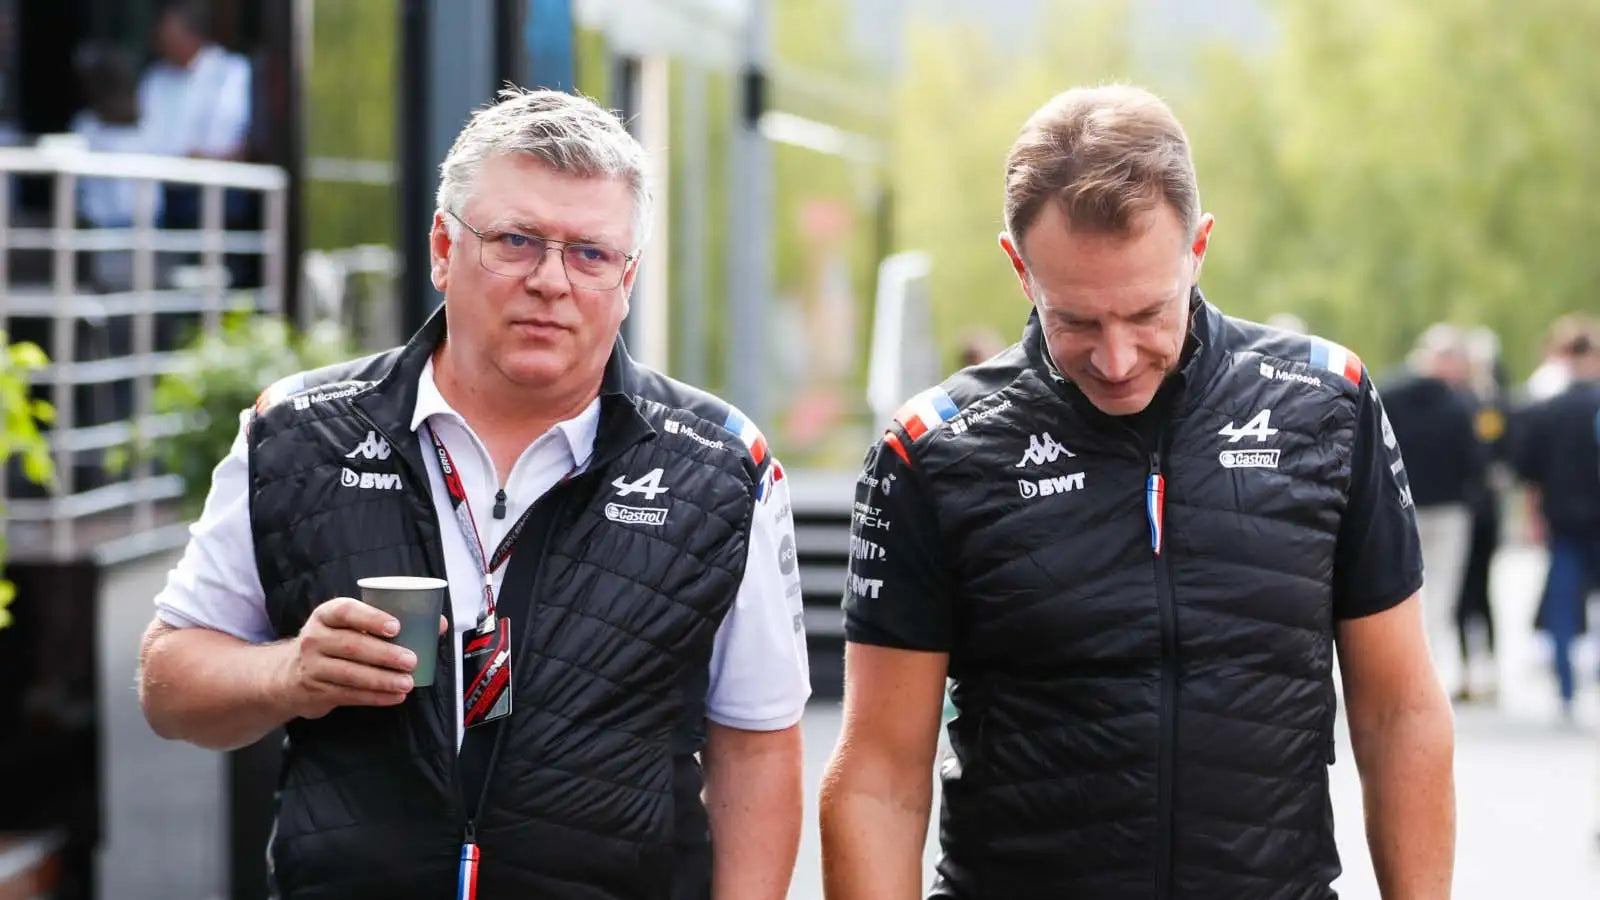 Ousted F1 team boss sparks speculation after being spotted in Honda hospitality